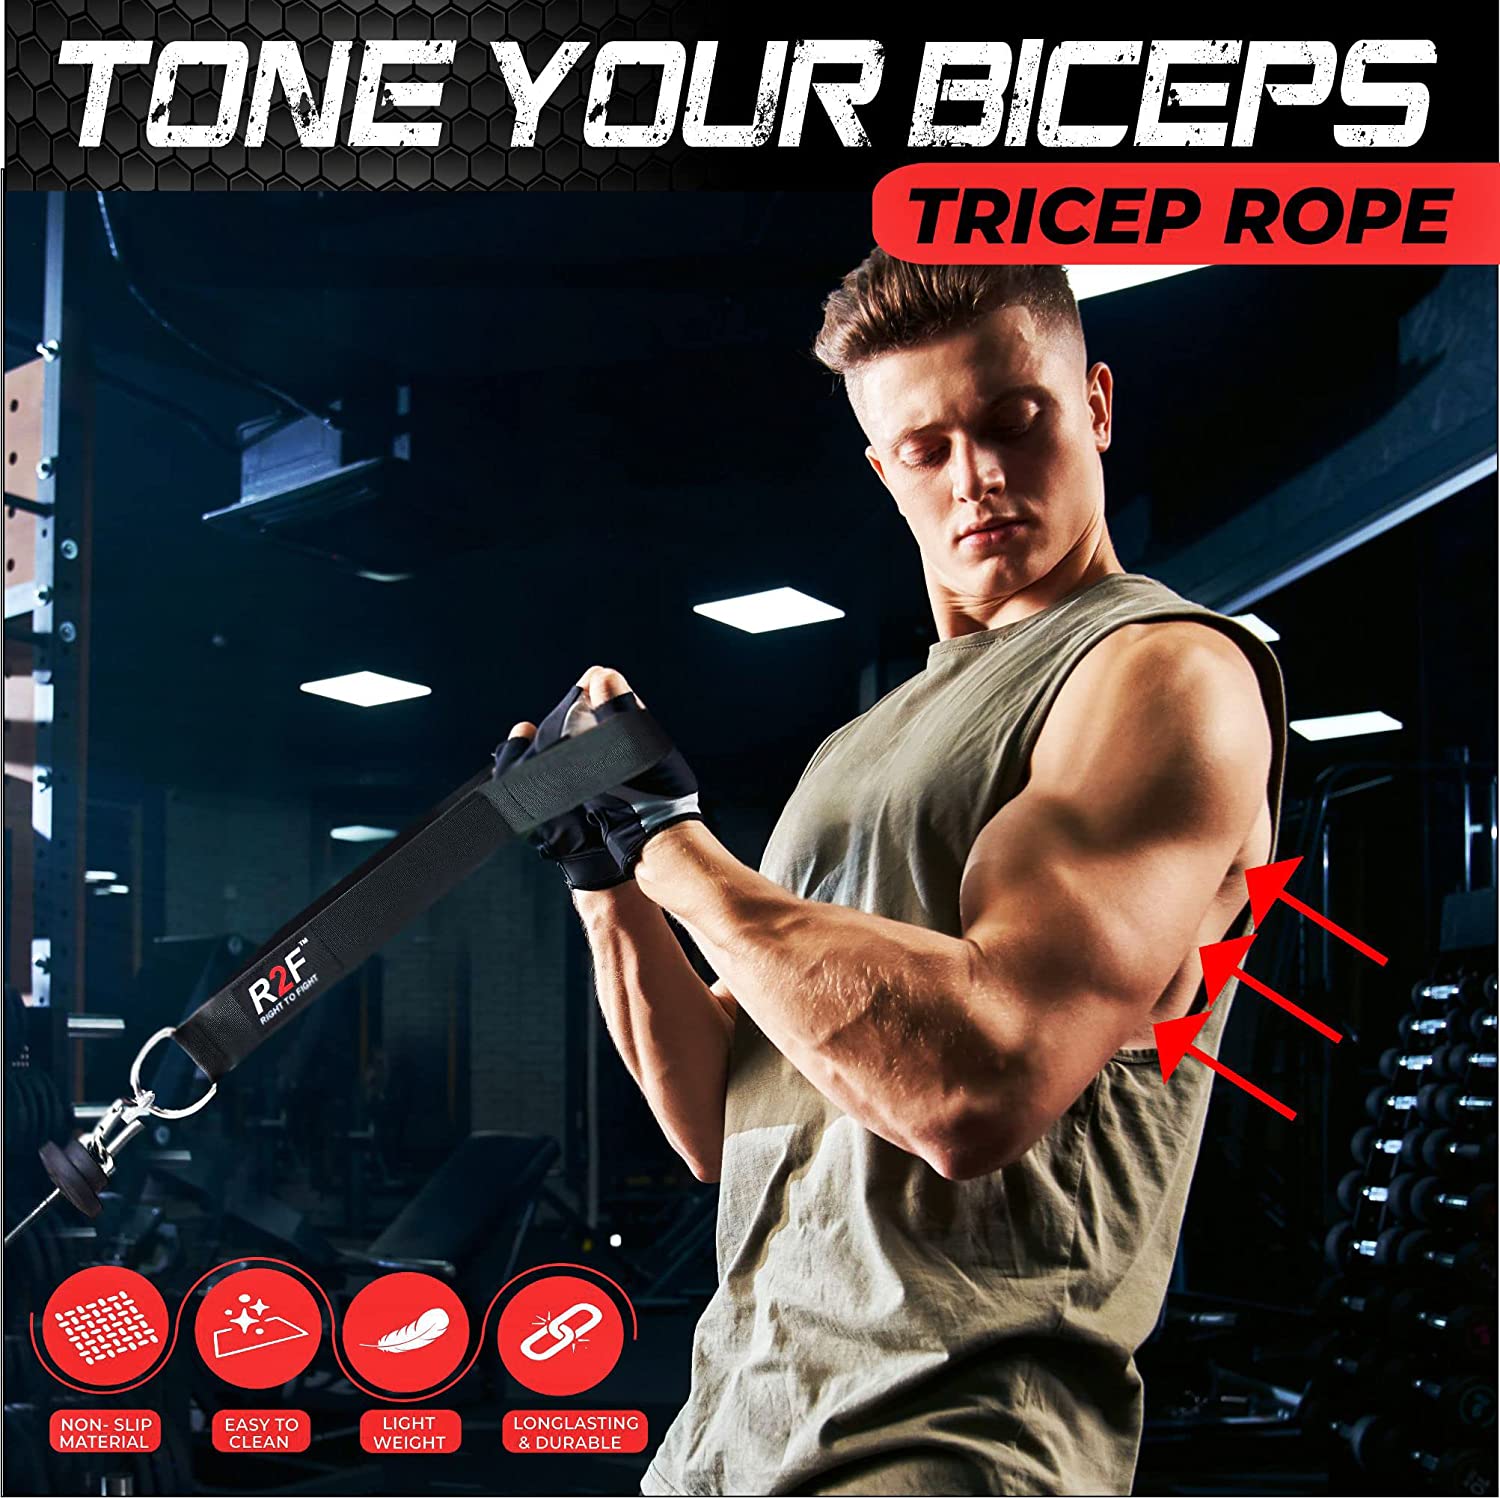 R2F Tricep Rope Fix Grip Push Pull Down Machine Attachment Cable Nylon - Heavy Duty Tricep Rope Cable Attachment For Fitness with Non-Slip Hand Grips Training Multi Gym Fitness Workout, Bicep, Tricep.